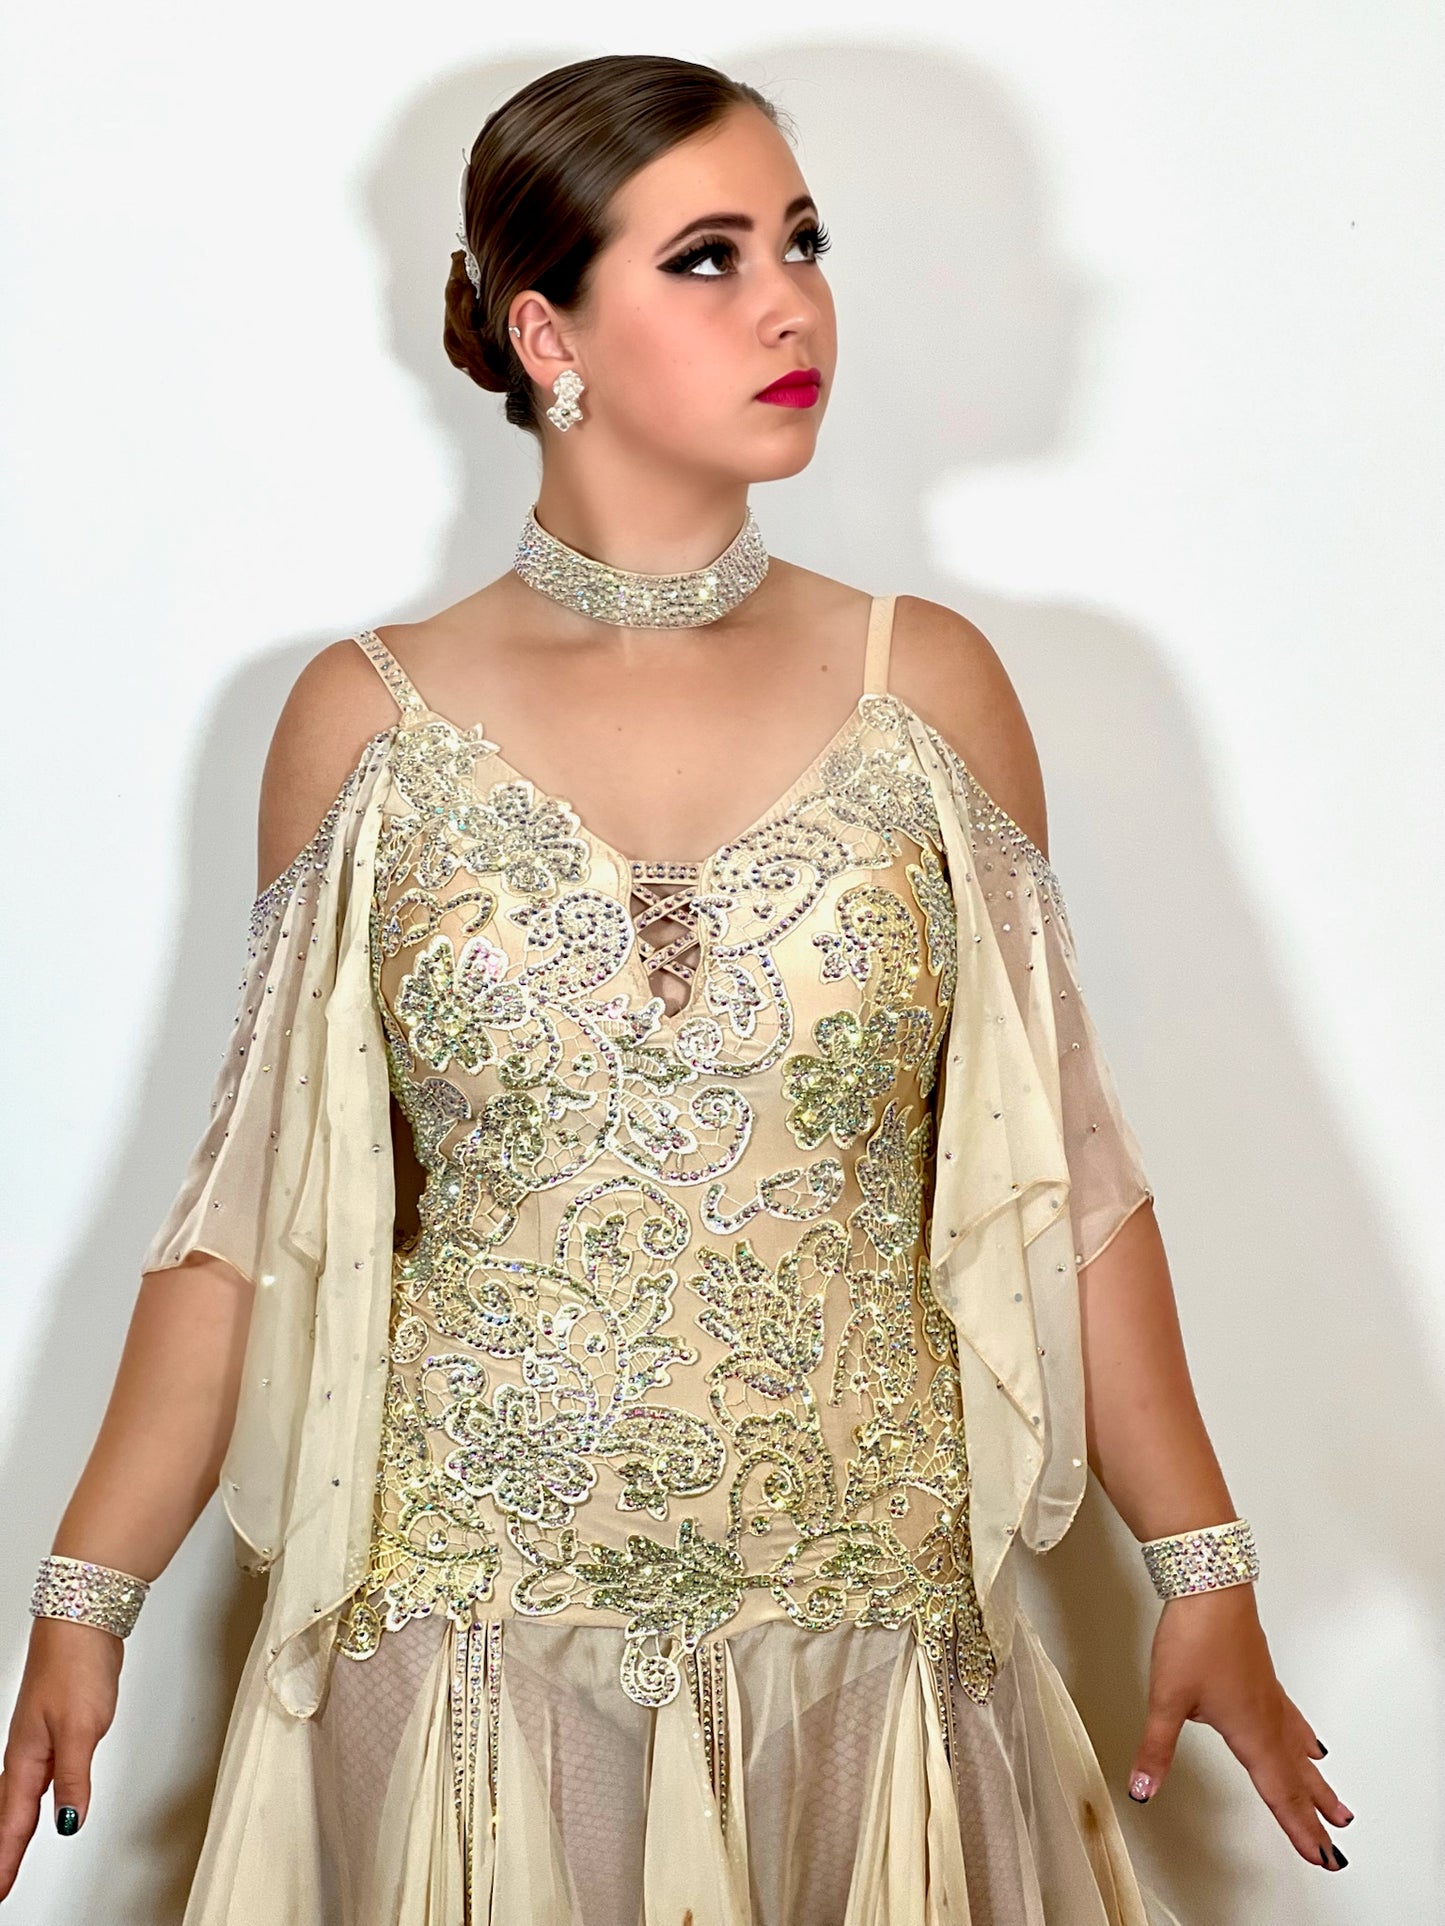 210 Champagne Latin dress fully decorated in champagne motifs & stones. Chiffon skirt with godets & ostrich feather detail